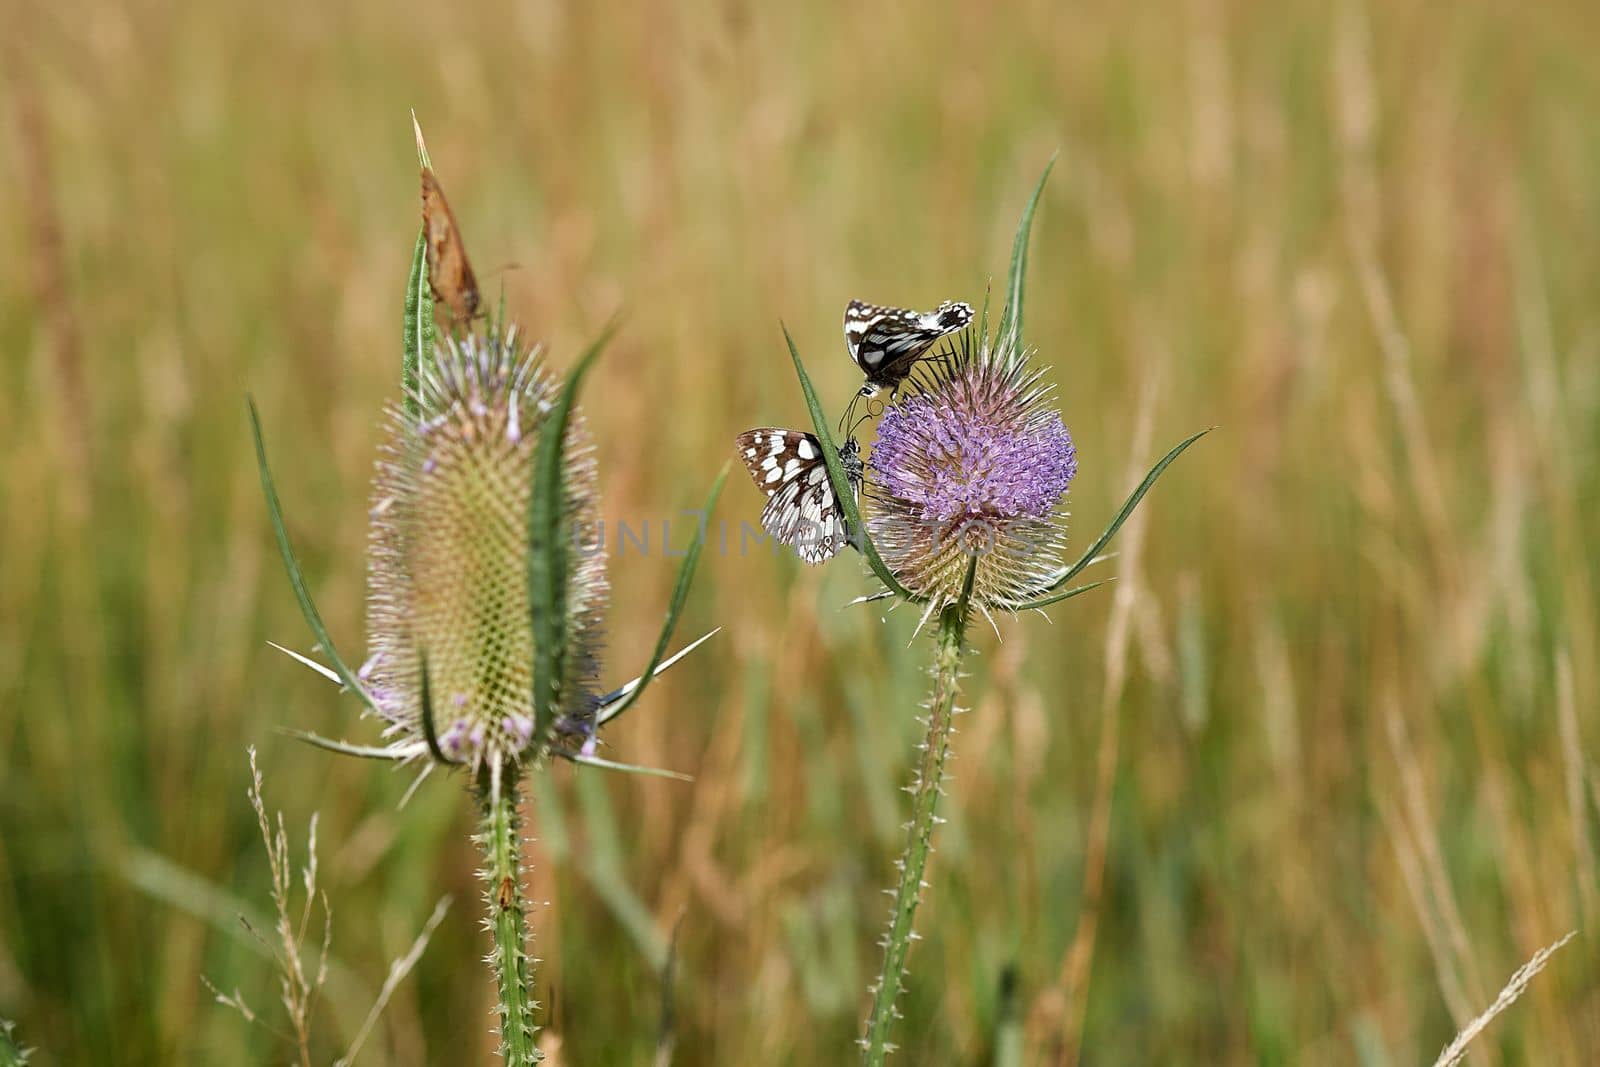 Flowering thistles with butterflies by Pammy1140